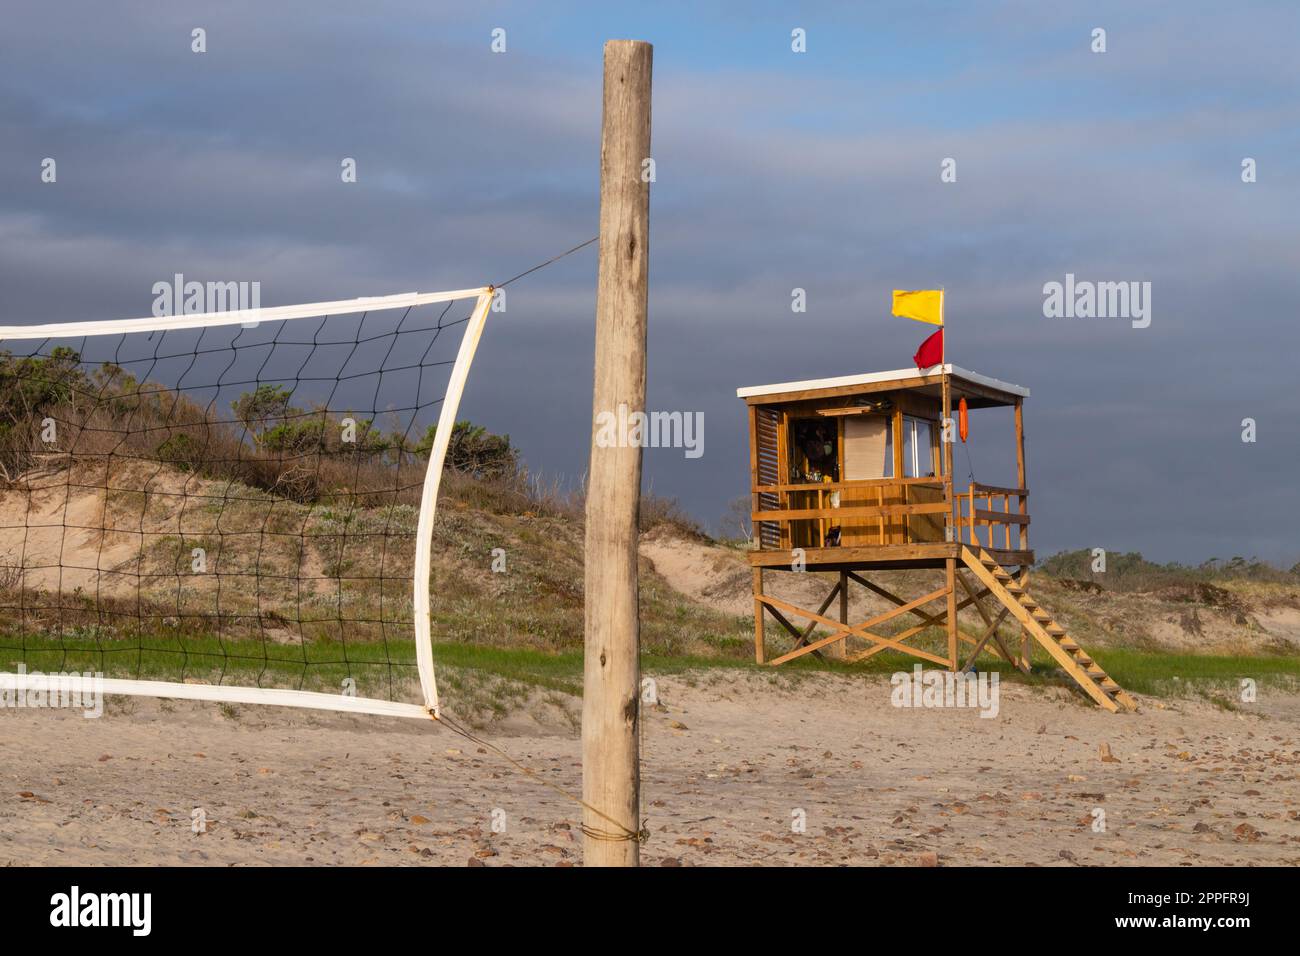 lifeguard tower next to a volleyball court on a windy day Stock Photo